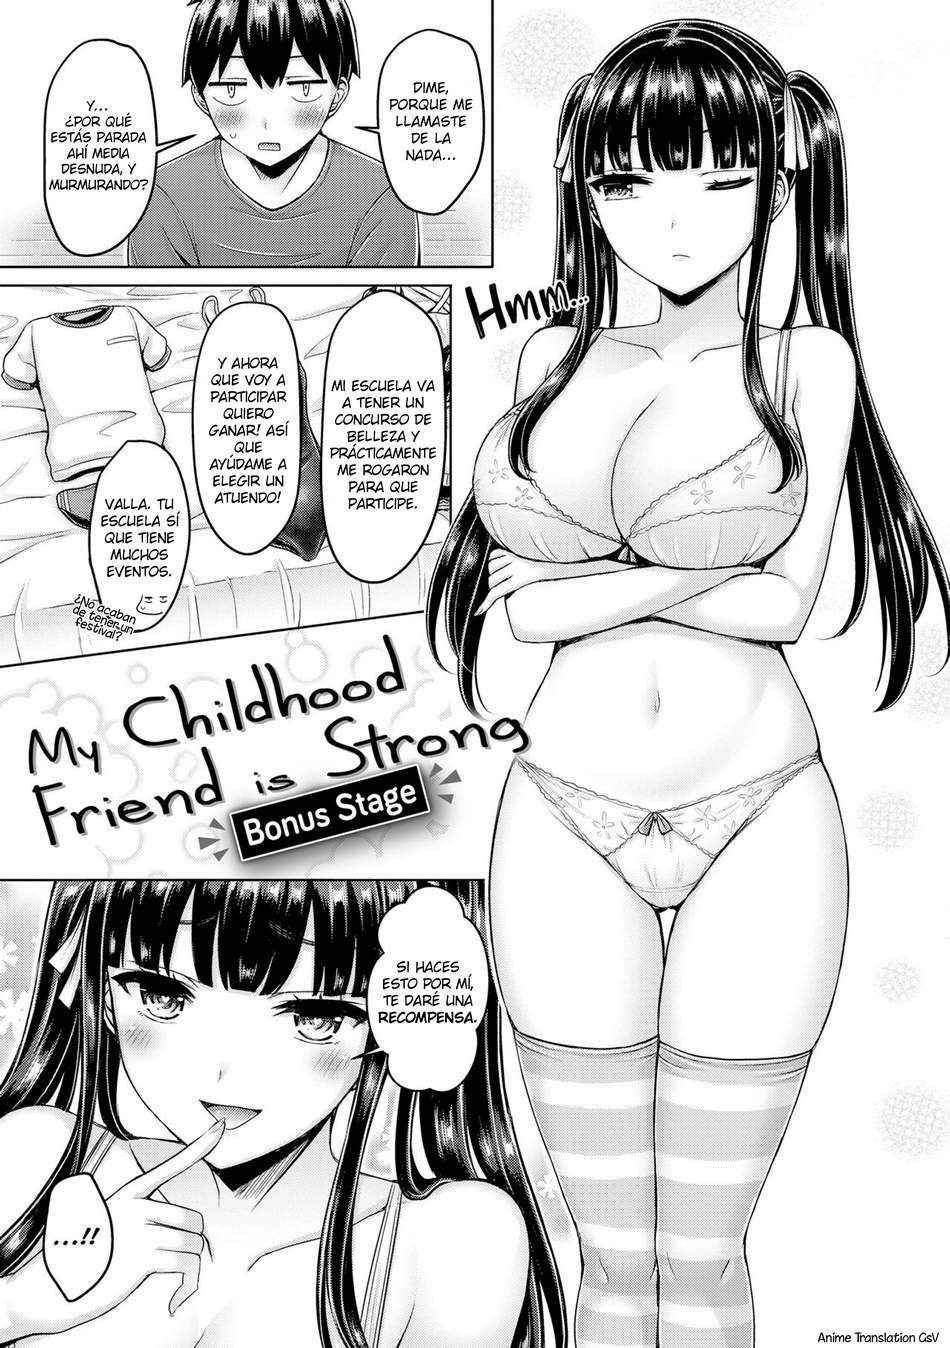 My Childhood Friend is Strong Extra - Page #1